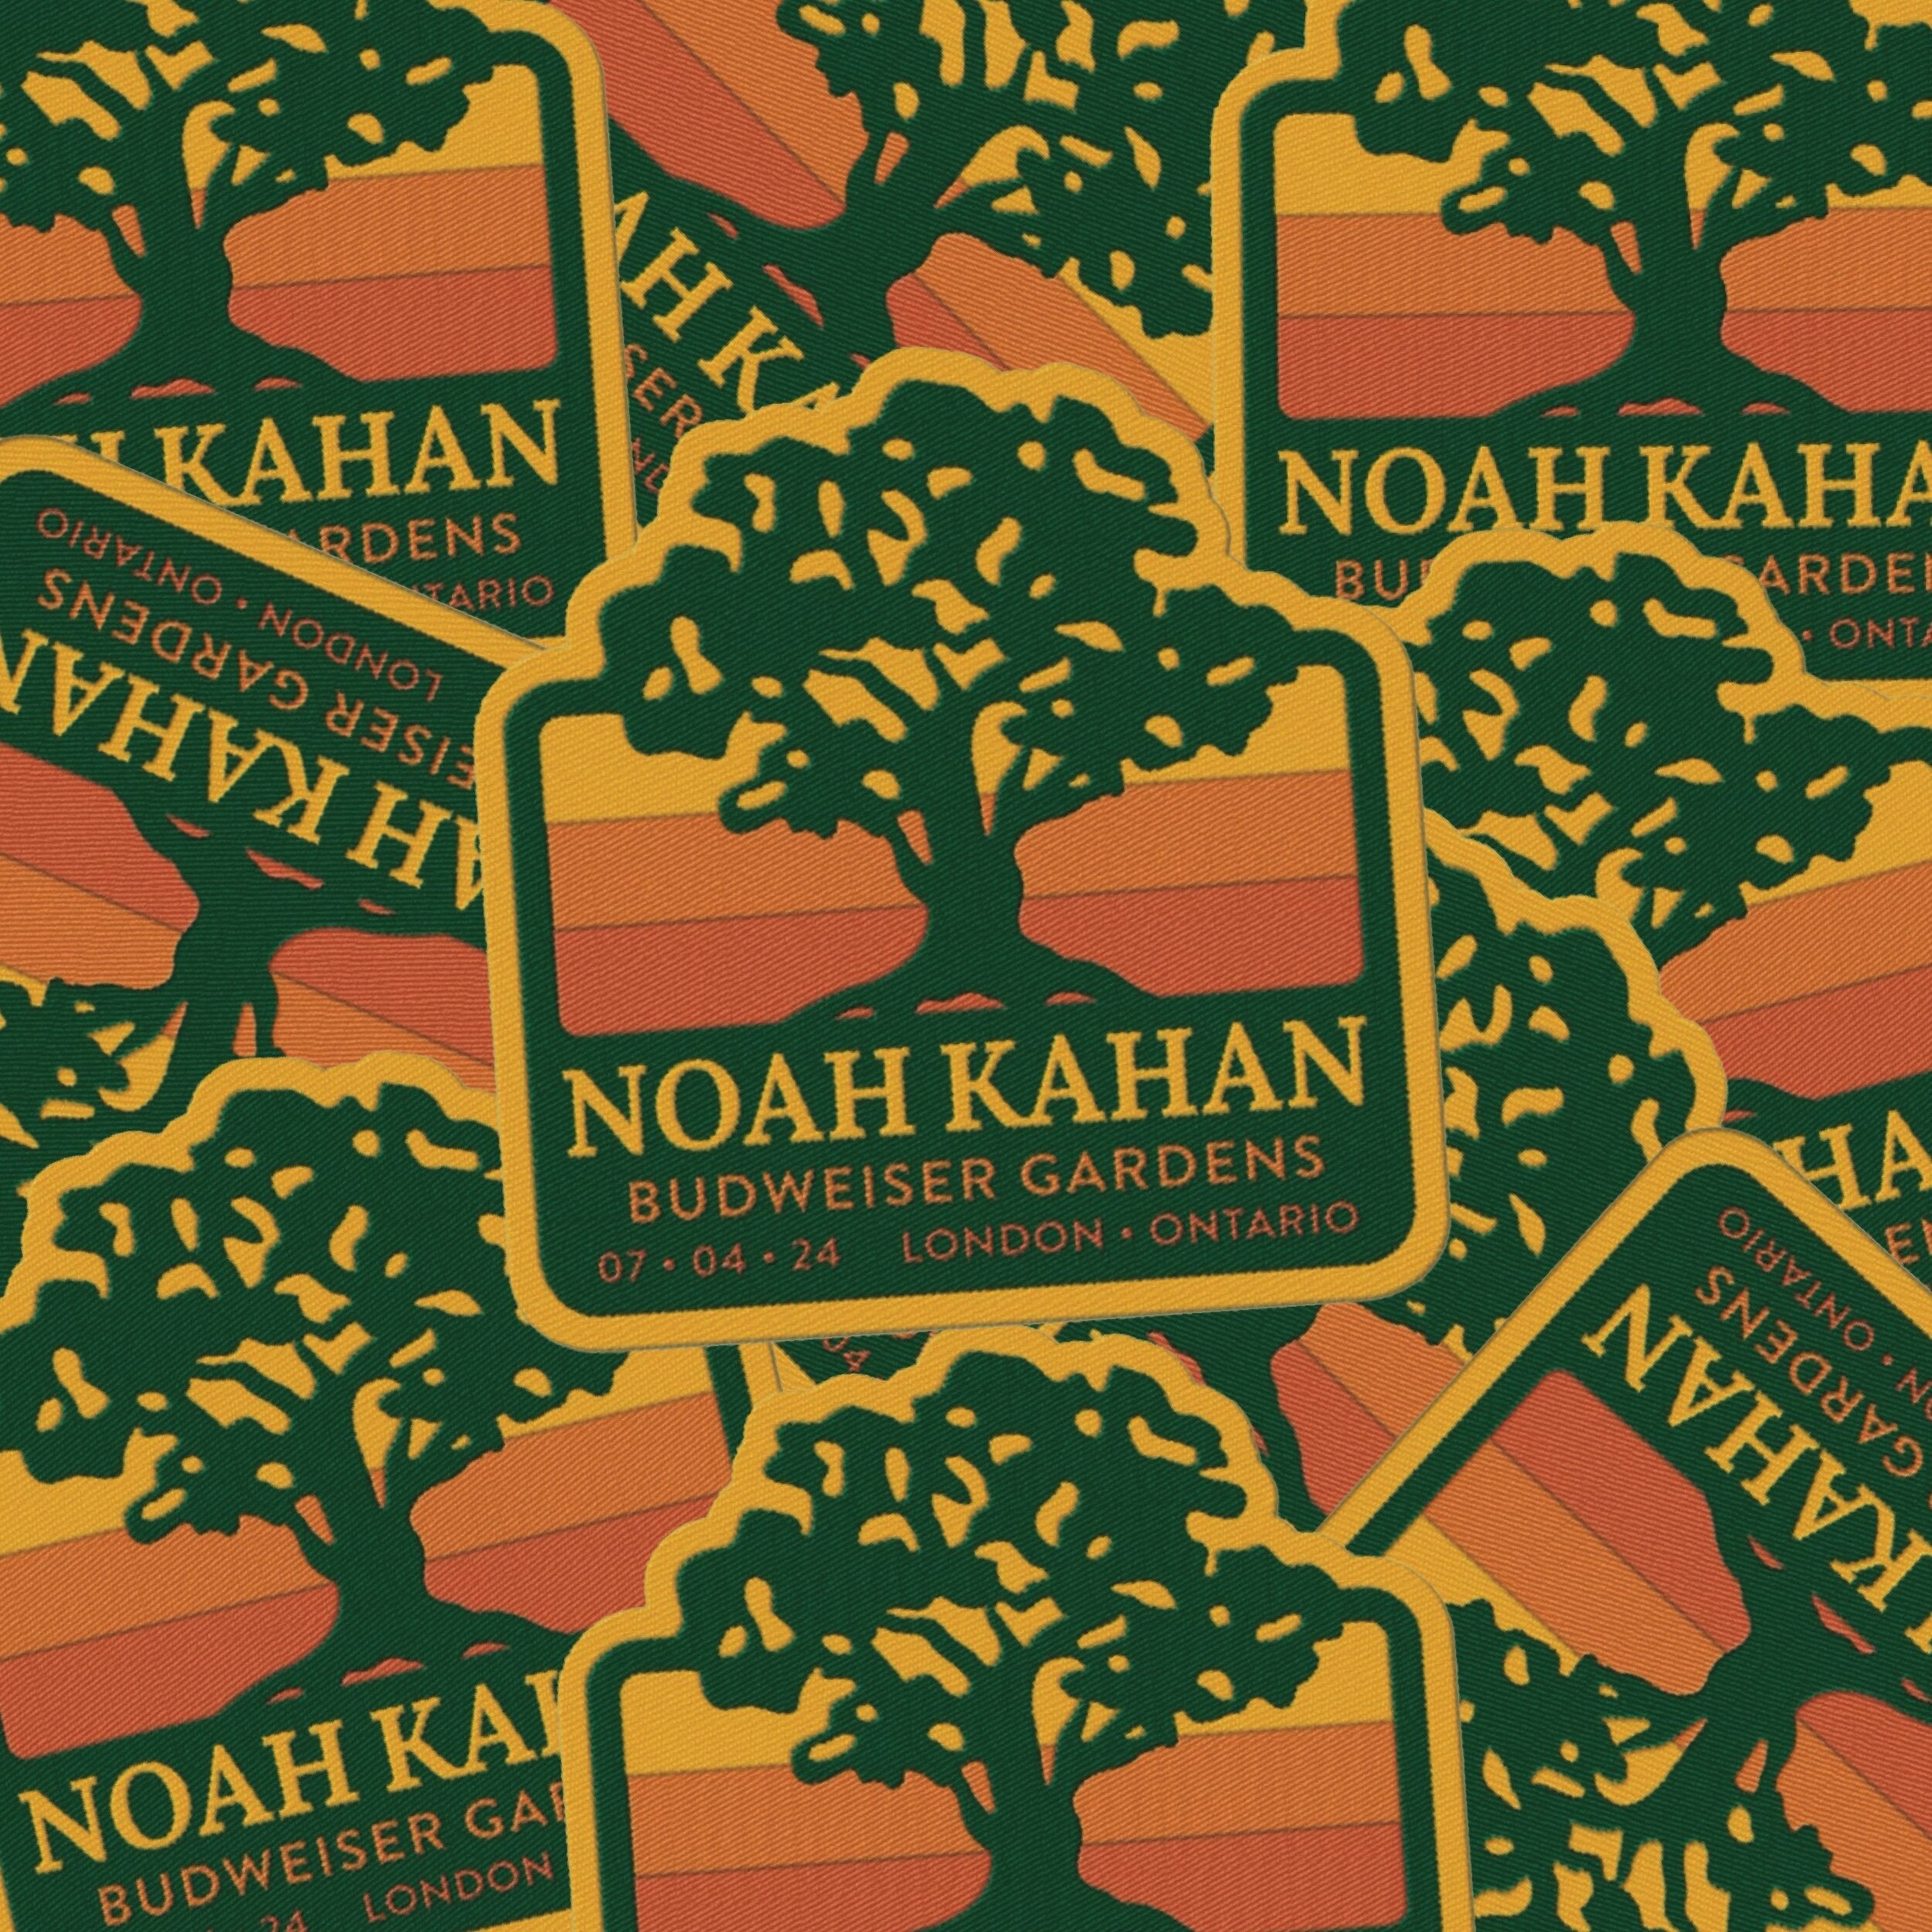 Here&rsquo;s another patch I had the pleasure of designing for @noahkahanmusic &lsquo;s Canadian tour.

London is nicknamed the &lsquo;Forest City&rsquo; and I just had to recreate the infamous &lsquo;Meeting Tree&rsquo; a 700 year old white oak tree